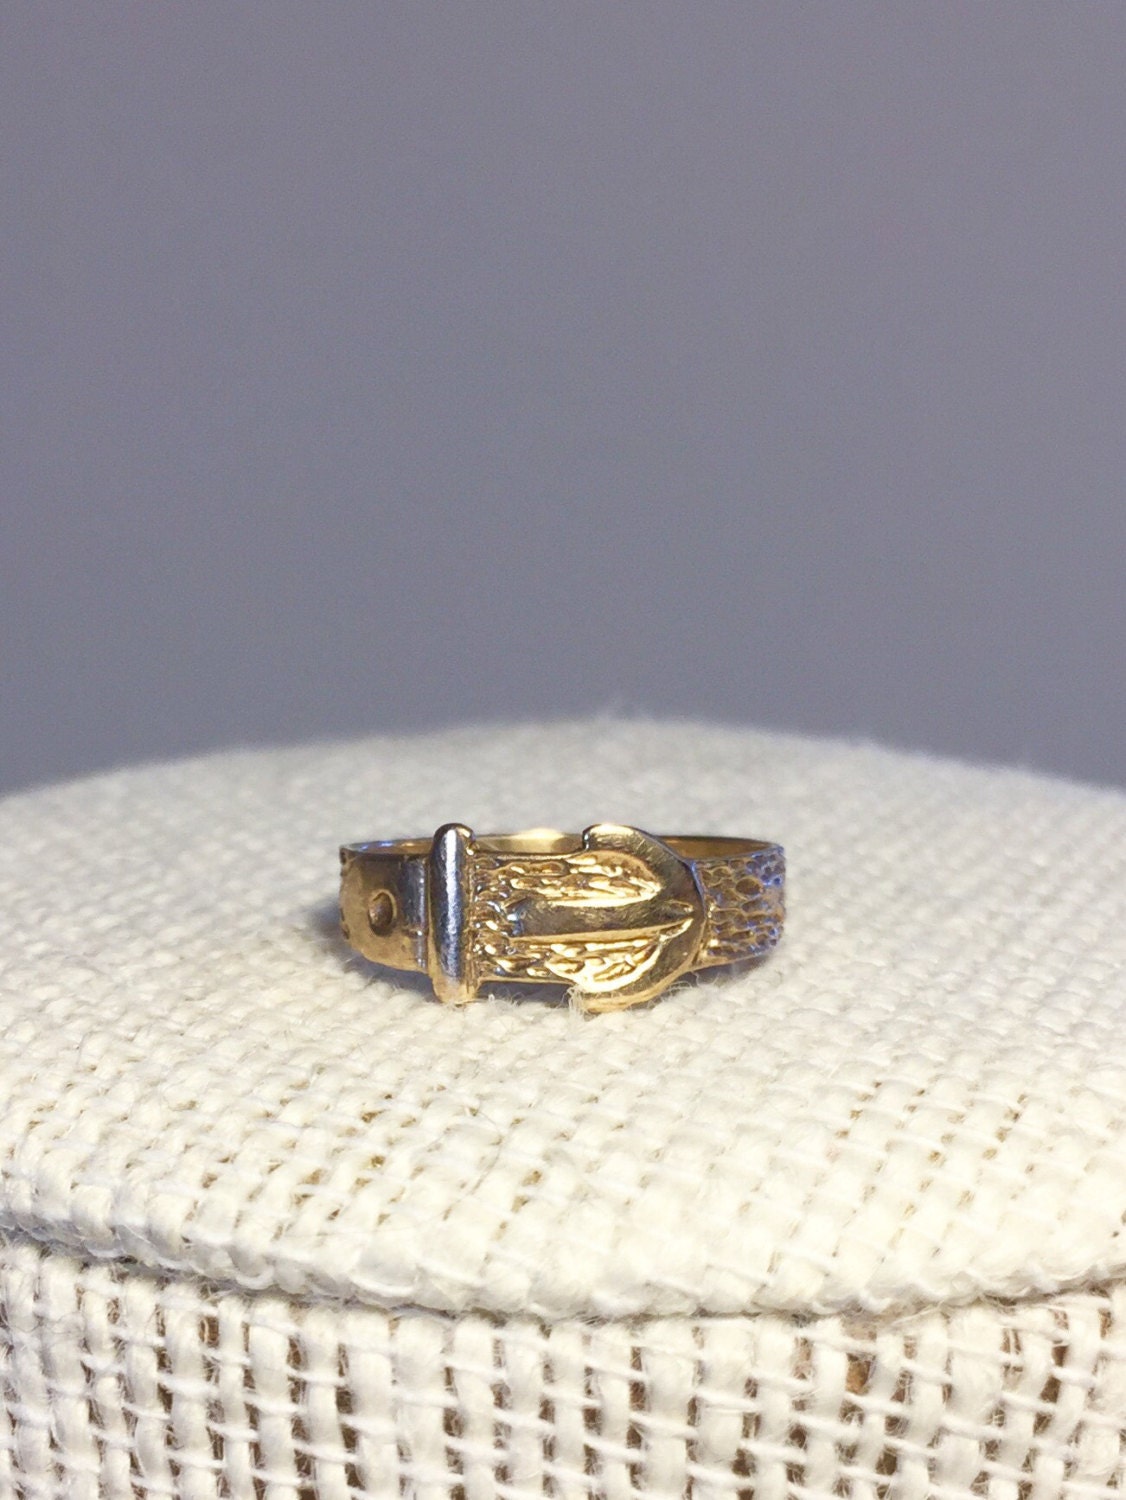 English Buckle ring in 9k Gold